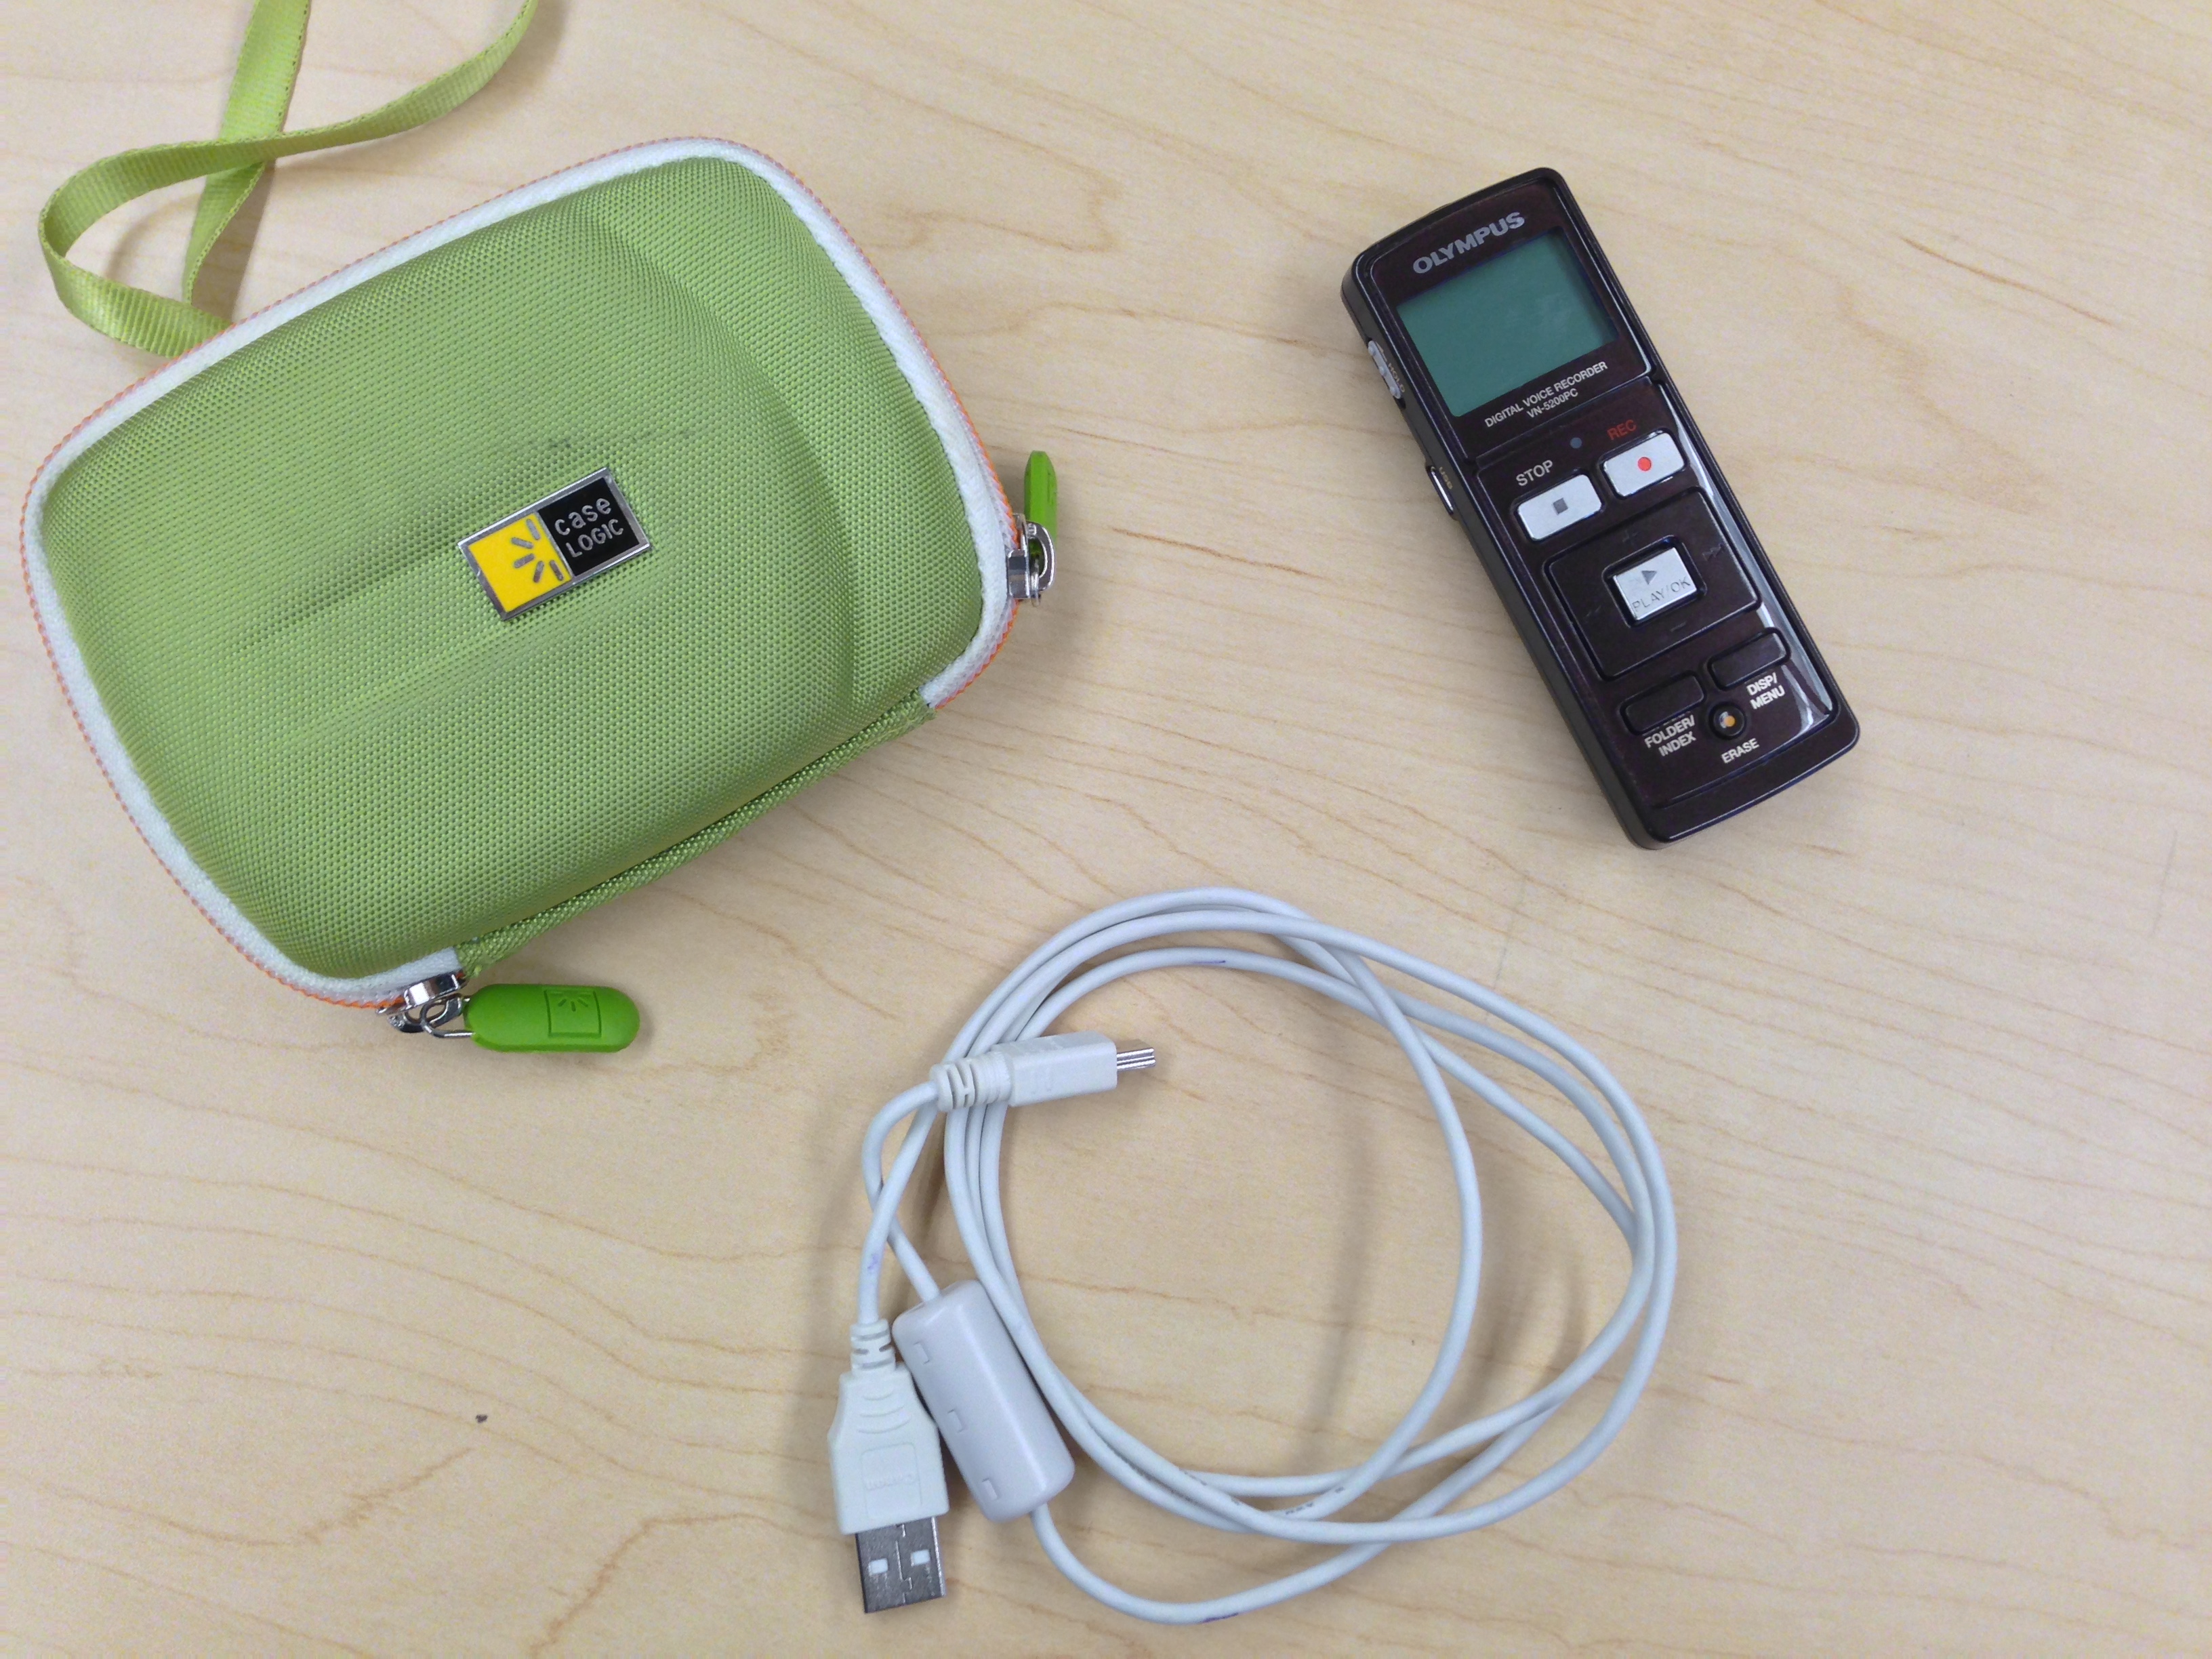 Digital Voice Recorder, syncing cable, green recorder case